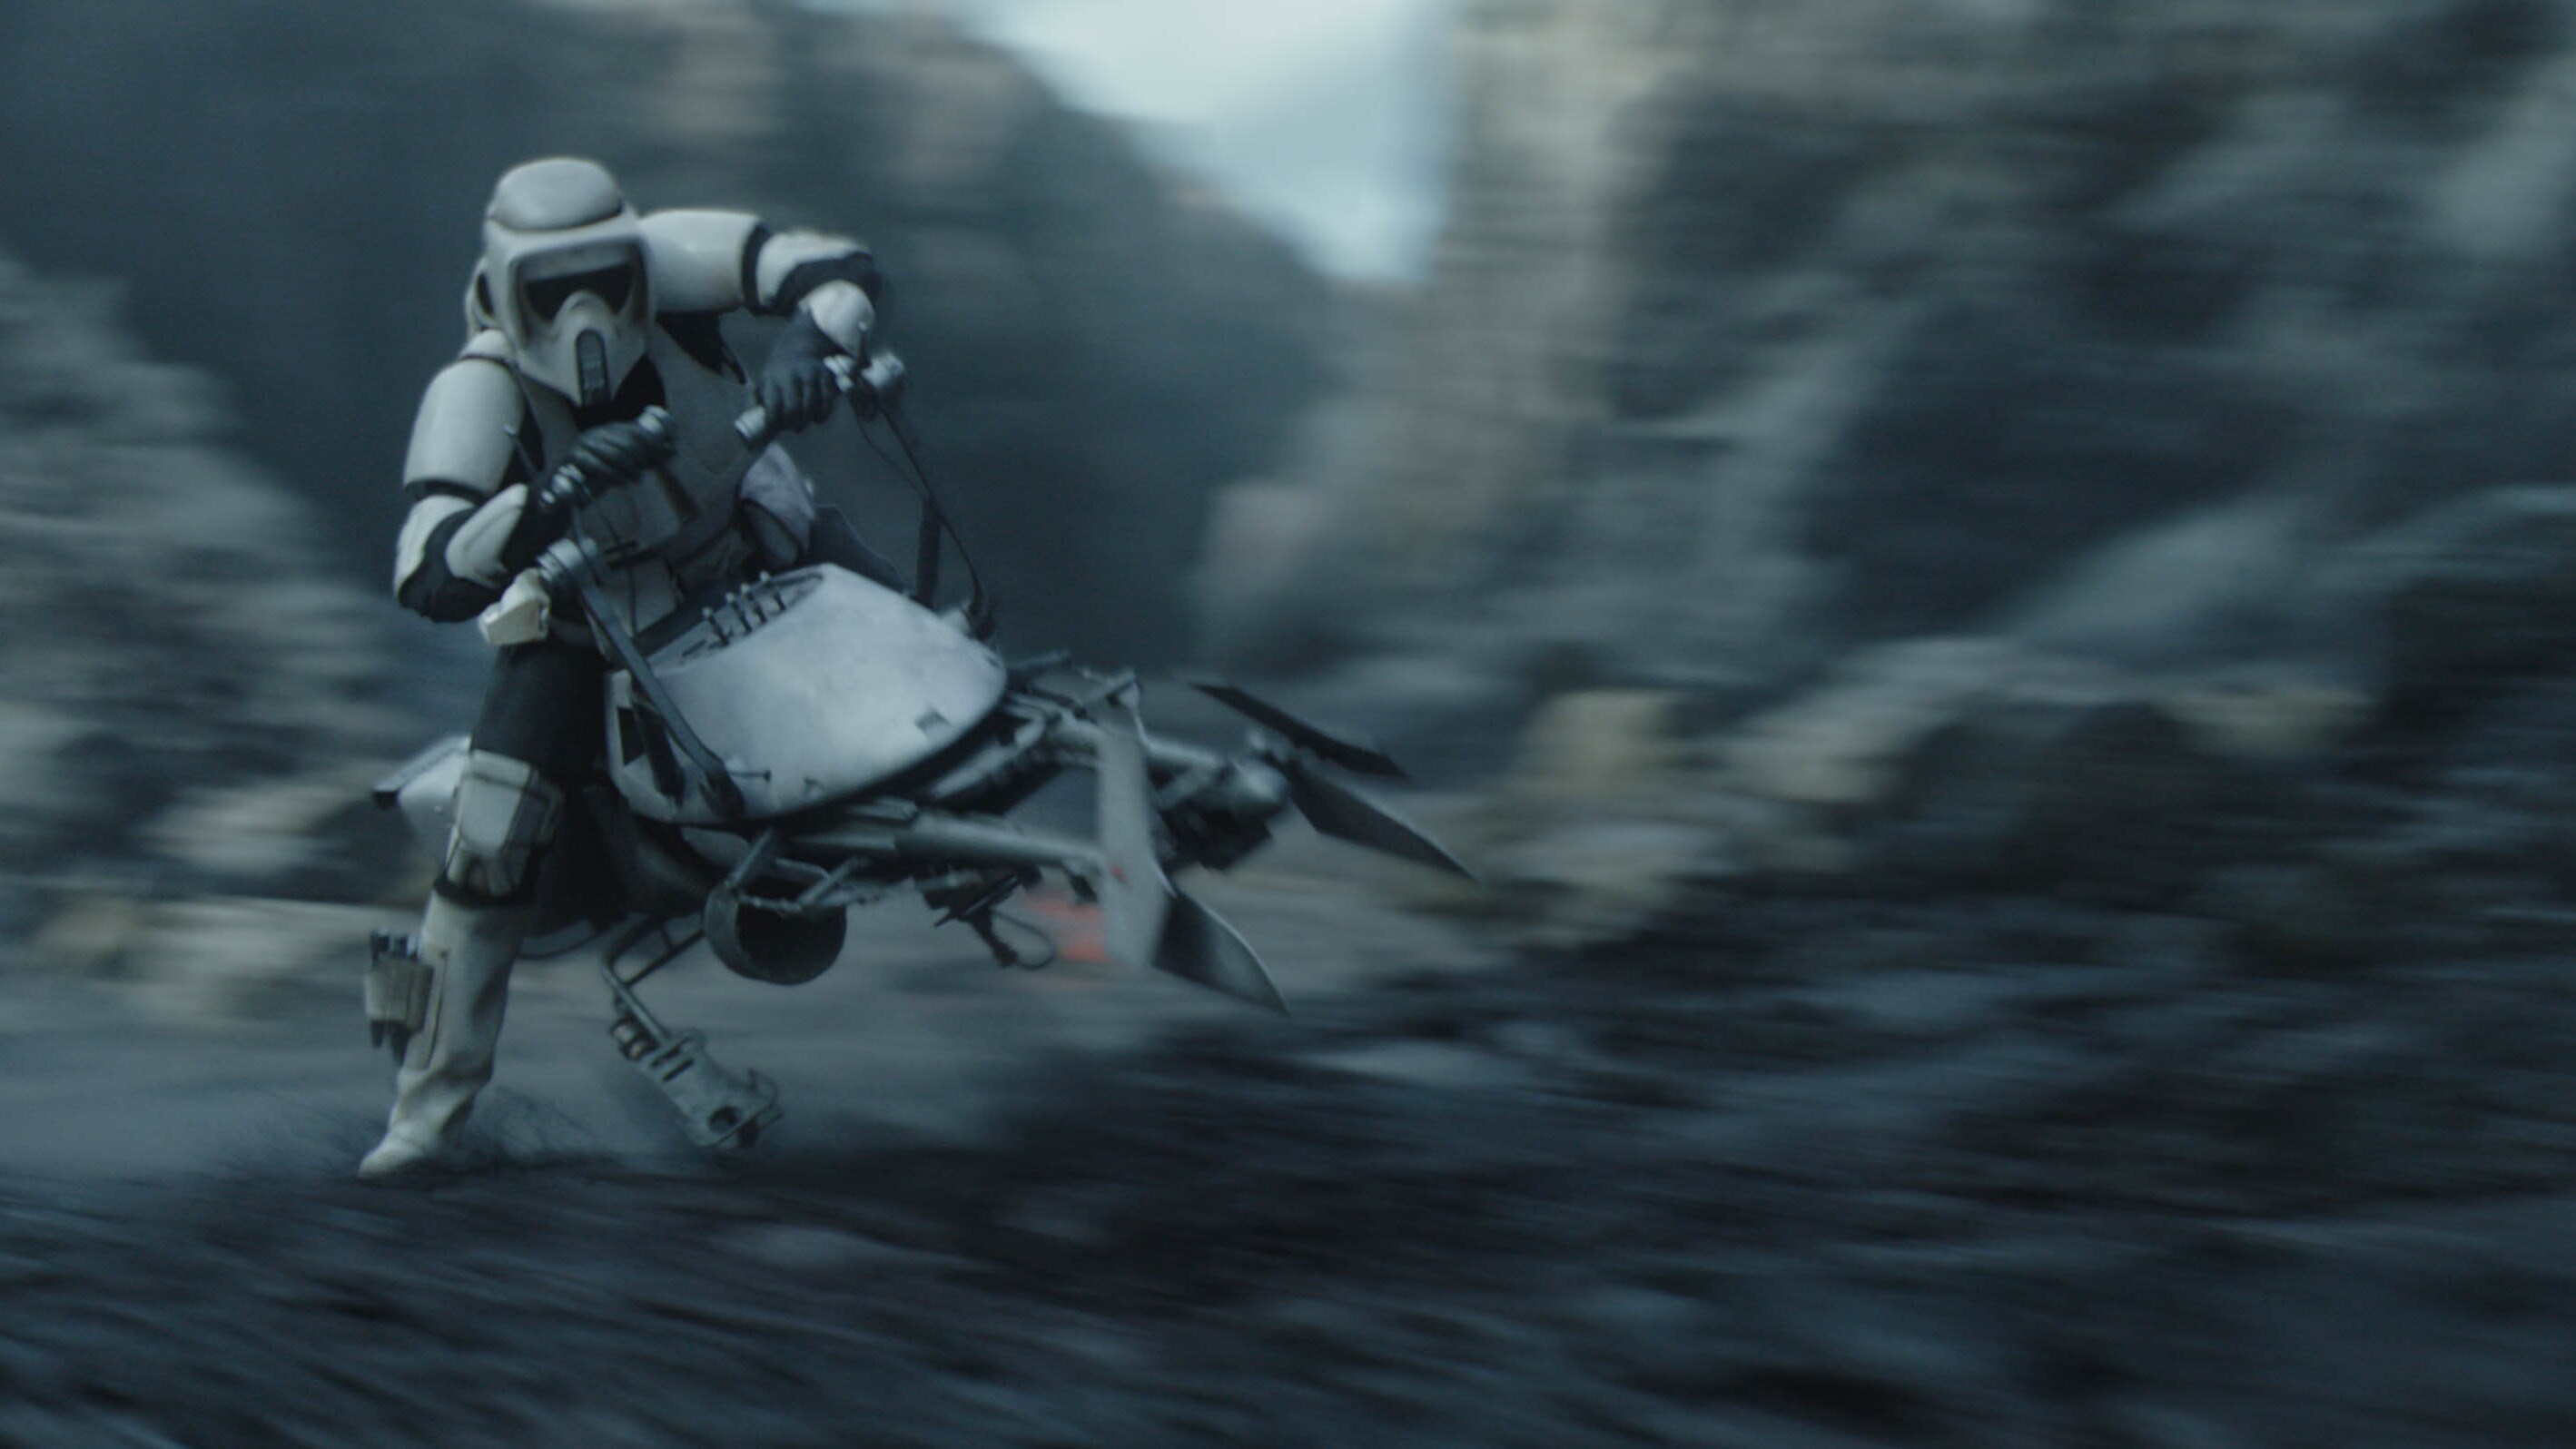 A scout trooper in THE MANDALORIAN, season two. © 2020 Lucasfilm Ltd. & TM. All Rights Reserved.